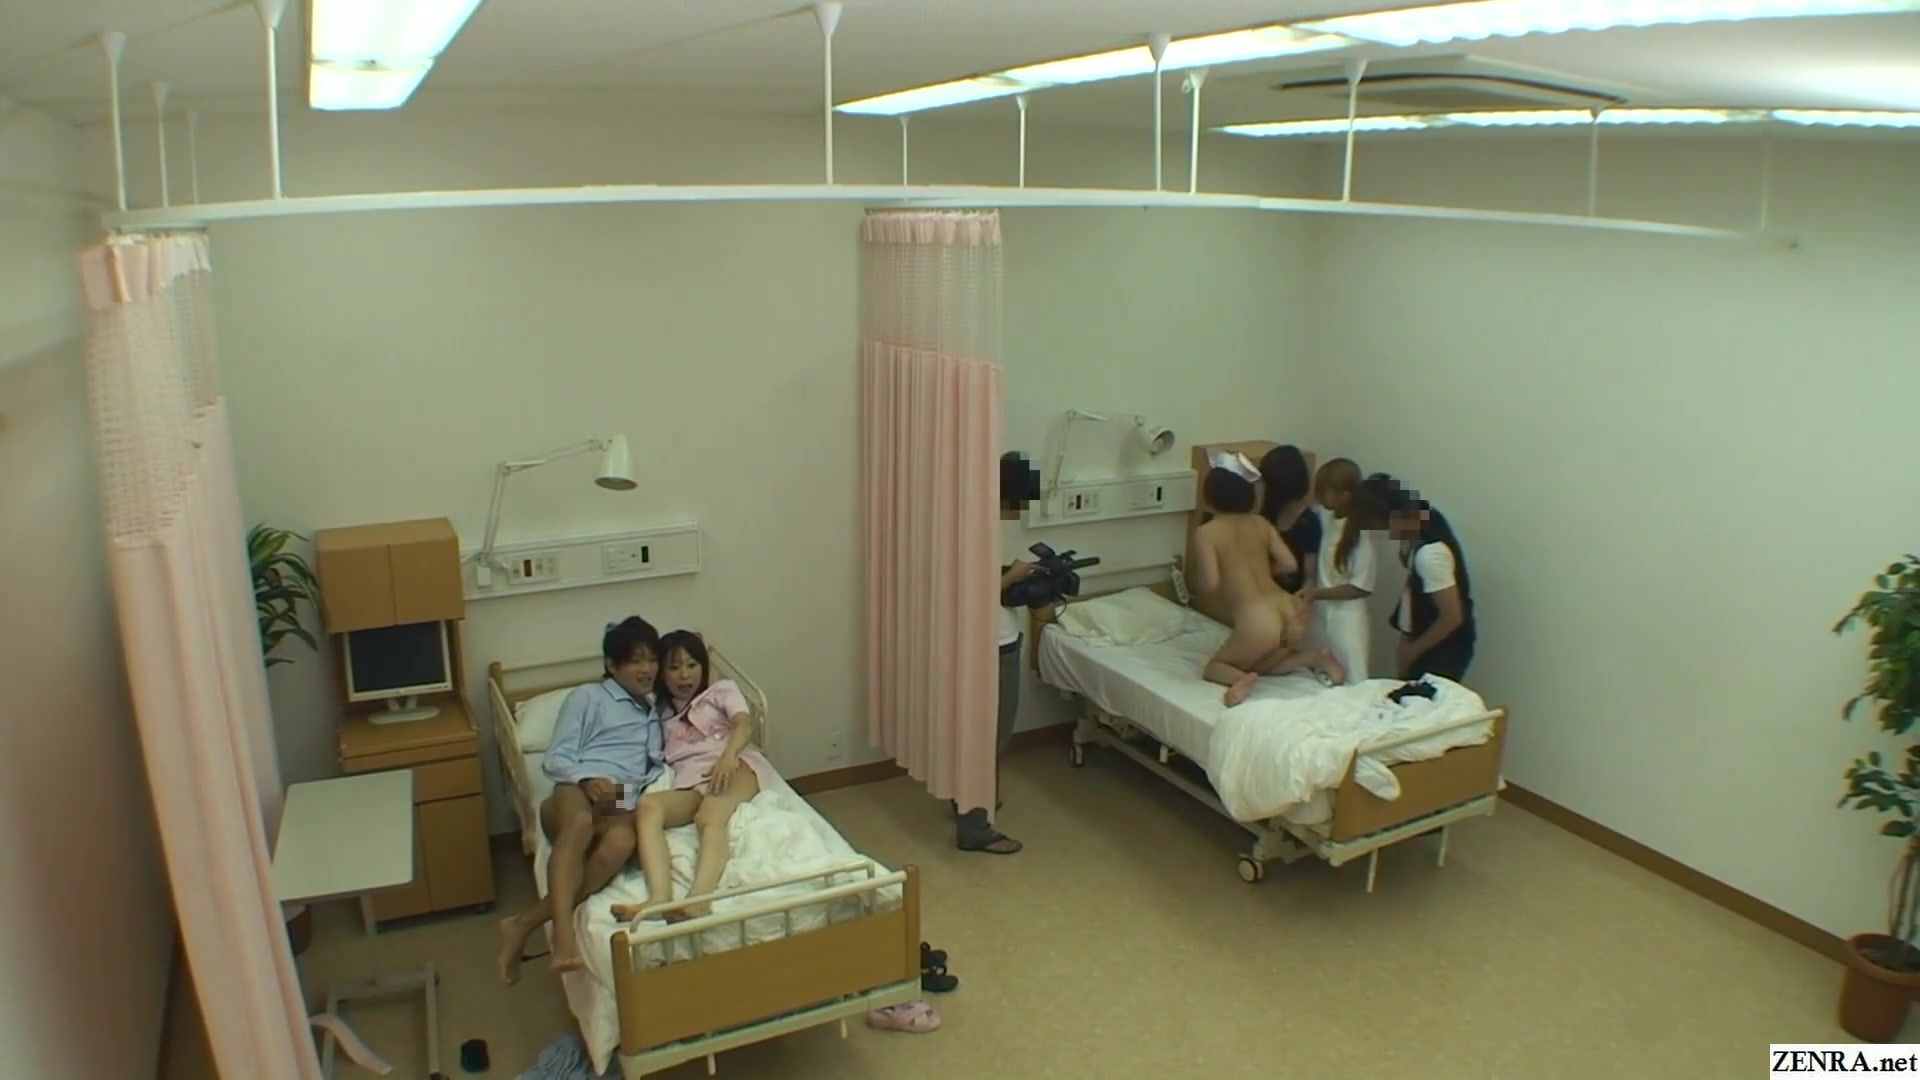 Japanese Naked In Hospital - Free HD Japanese CMNF Weird Prank TV Show in Hospital Featuring Naked  Patient and Accidentally Aroused Boyfriend Porn Video